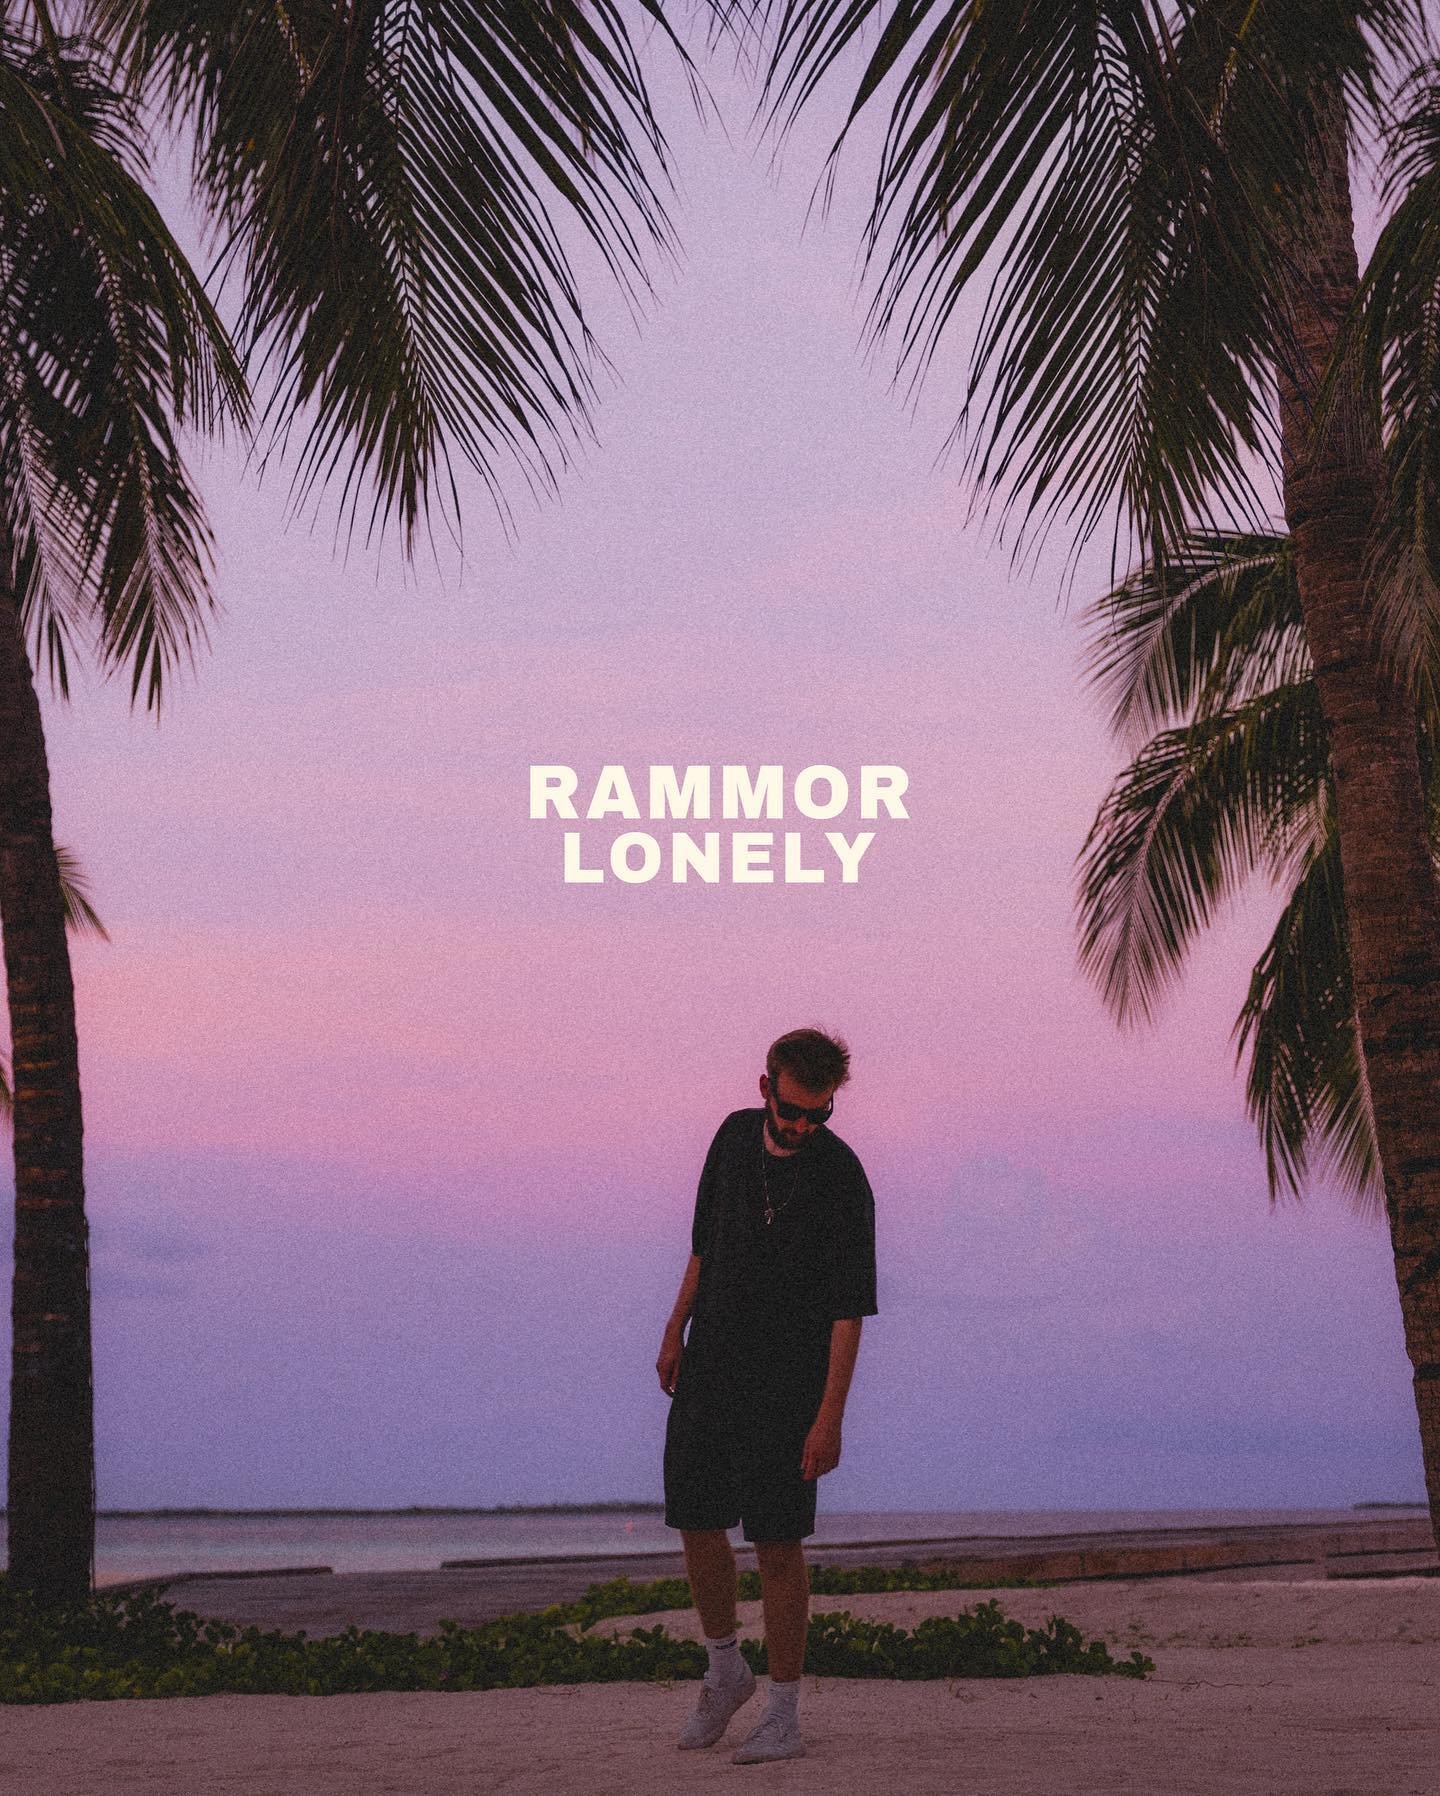 I&rsquo;m so glad LONELY is finally all yours🌴❤️
Rammor summer chill vibes are backkkckckxlxk and I can&lsquo;t be more excited for whats to come in summer 2024 👀🔥
Massive thanks to everybody involved making this happen but especially to my boiii 